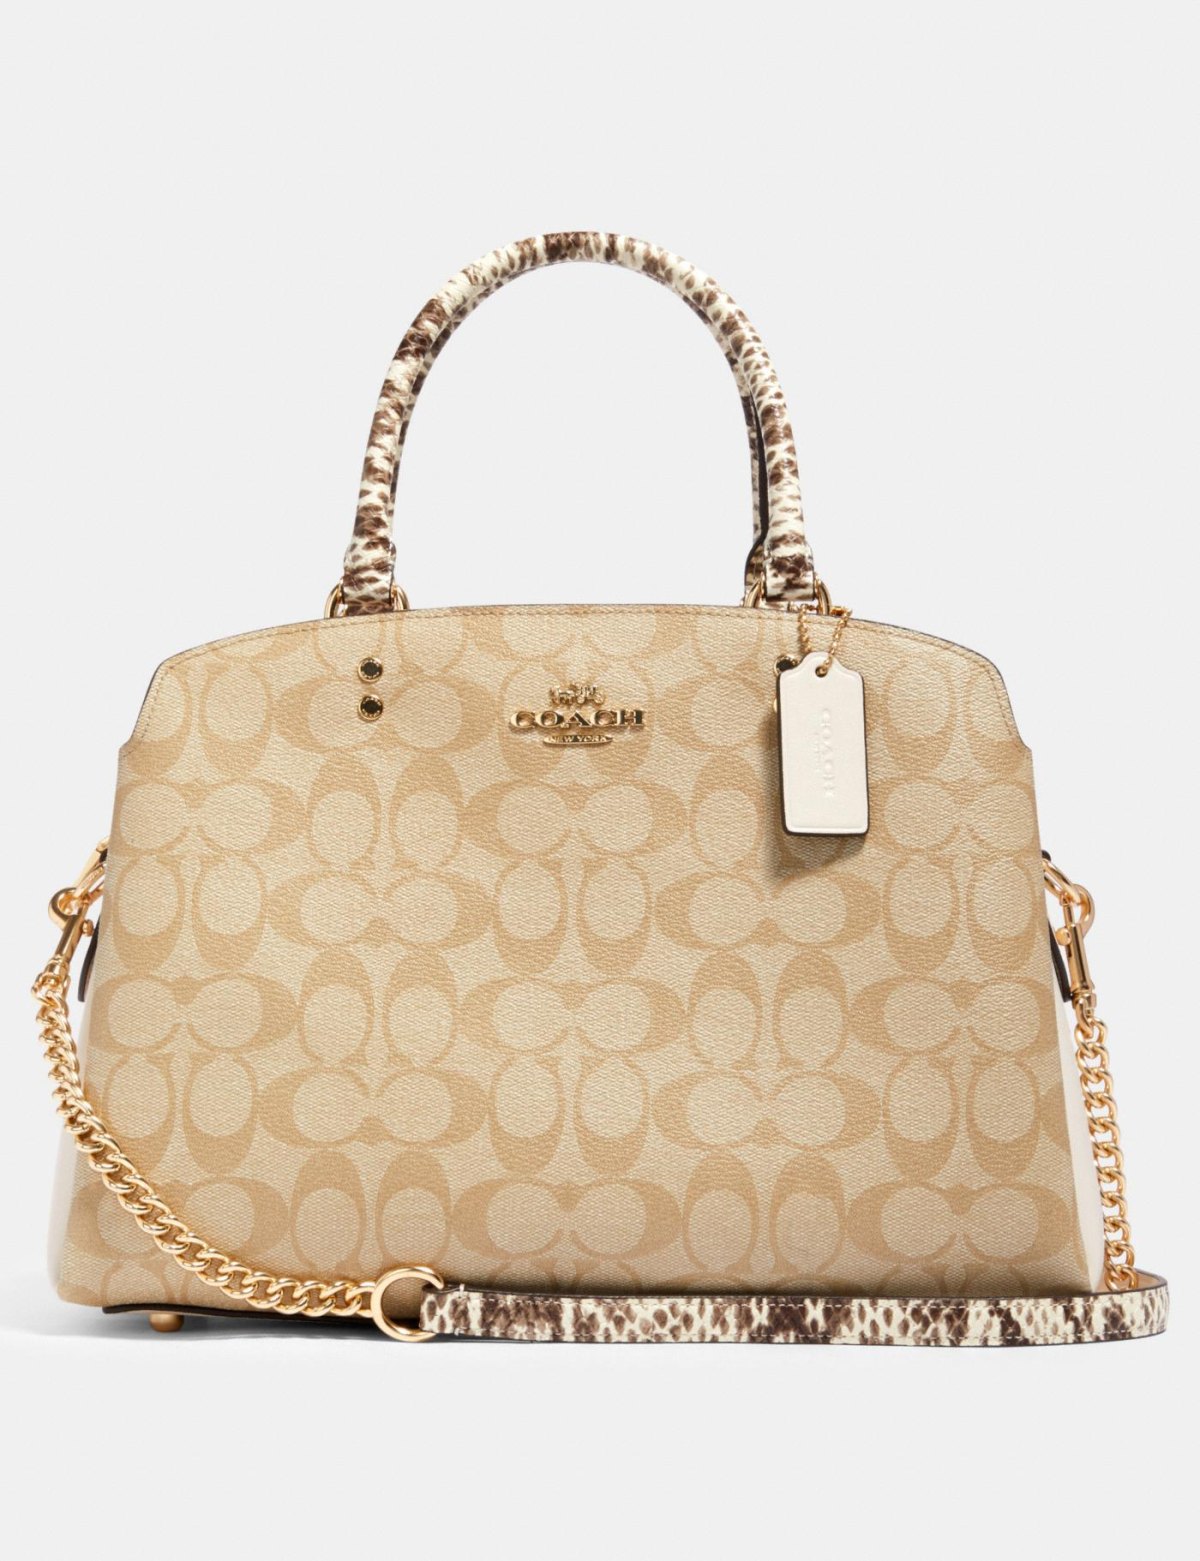 The Coach Purse on Sale Outlet Is Up to 70 Percent Off - PureWow